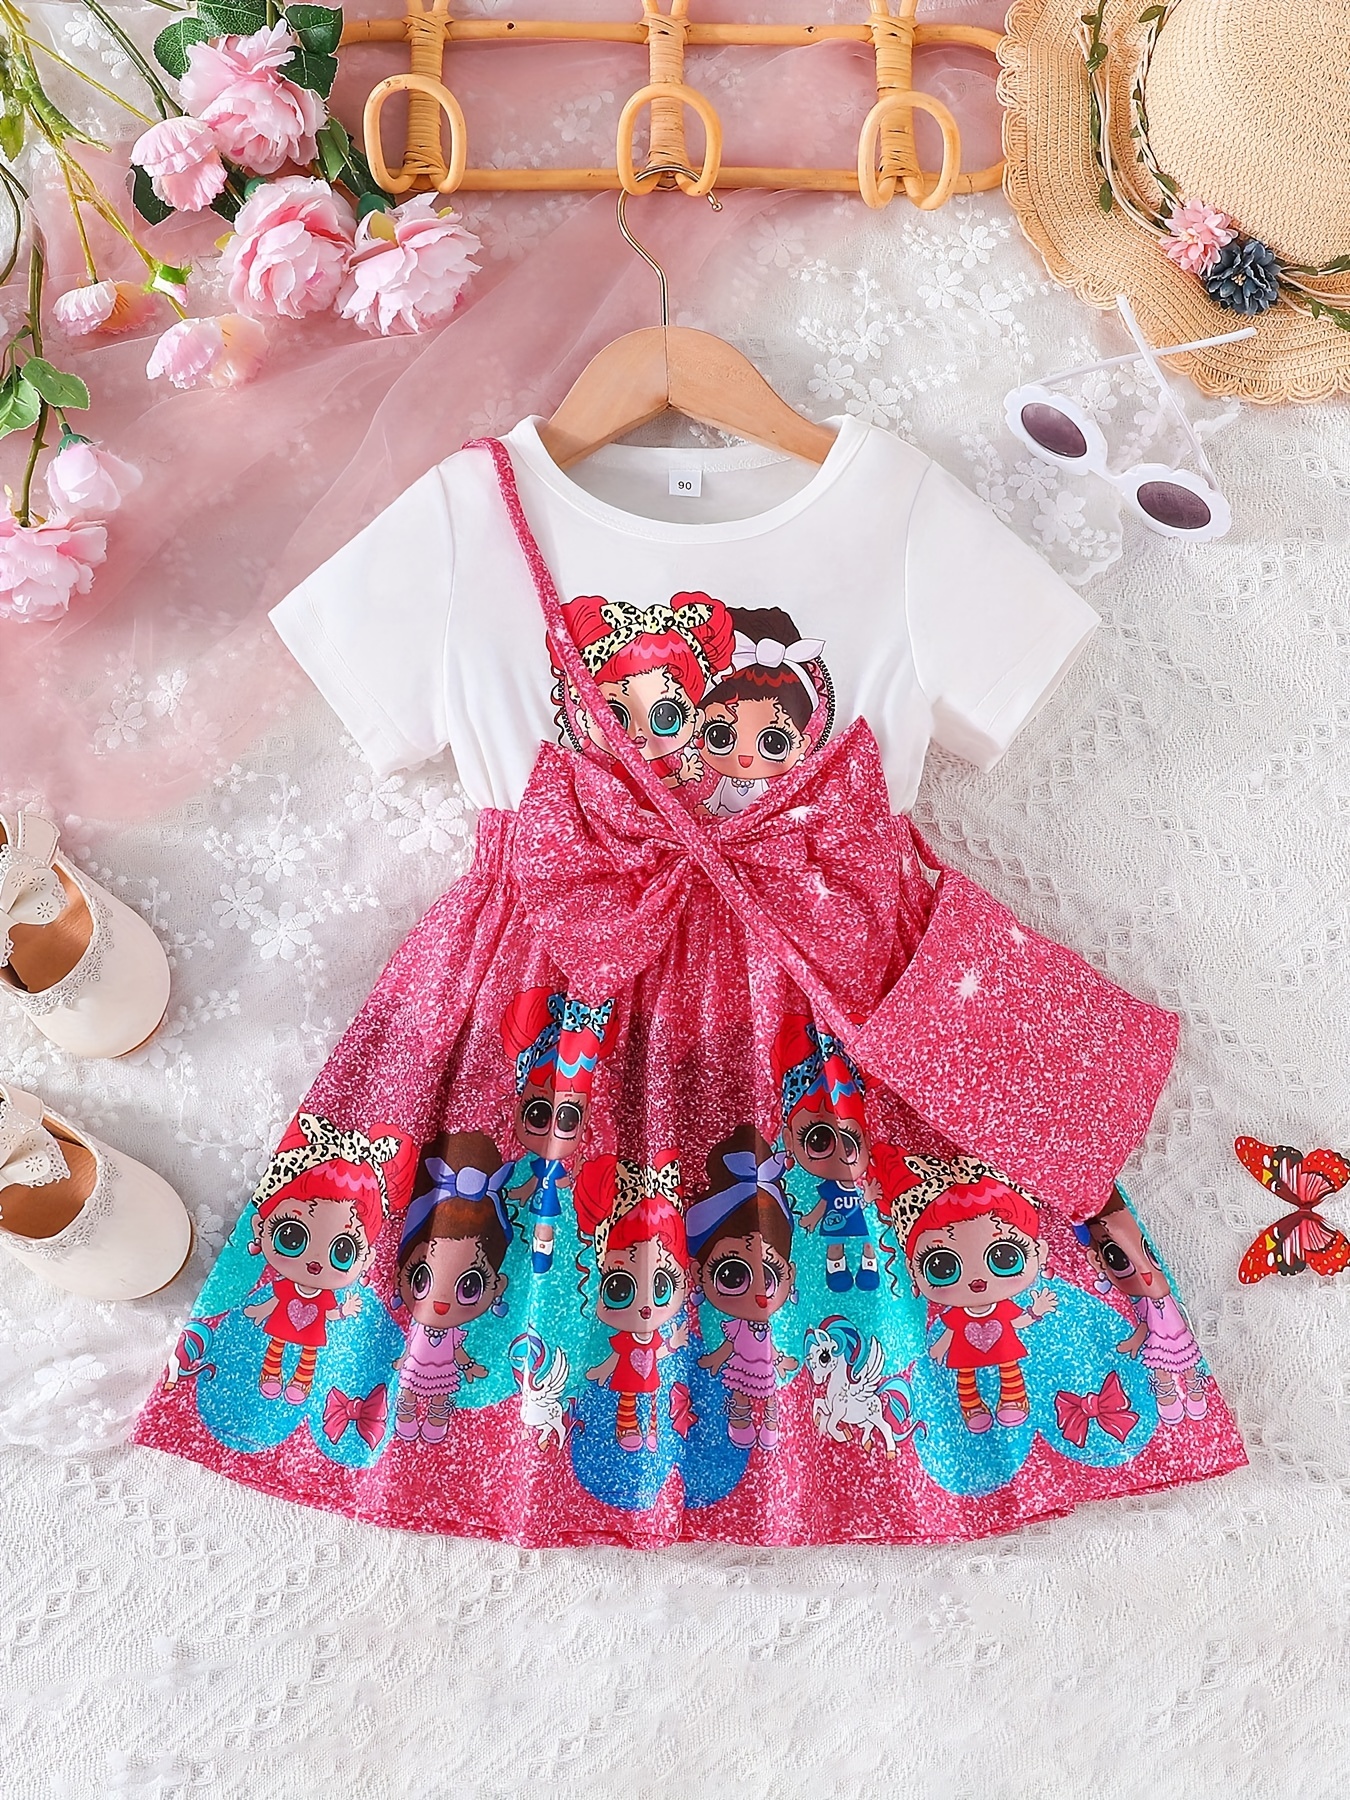  Girls 3 to 7 Years Old Party Dress Heart Print Sleeveless Lace  Mesh Princess Dress Big Girl Summer Clothes: Clothing, Shoes & Jewelry